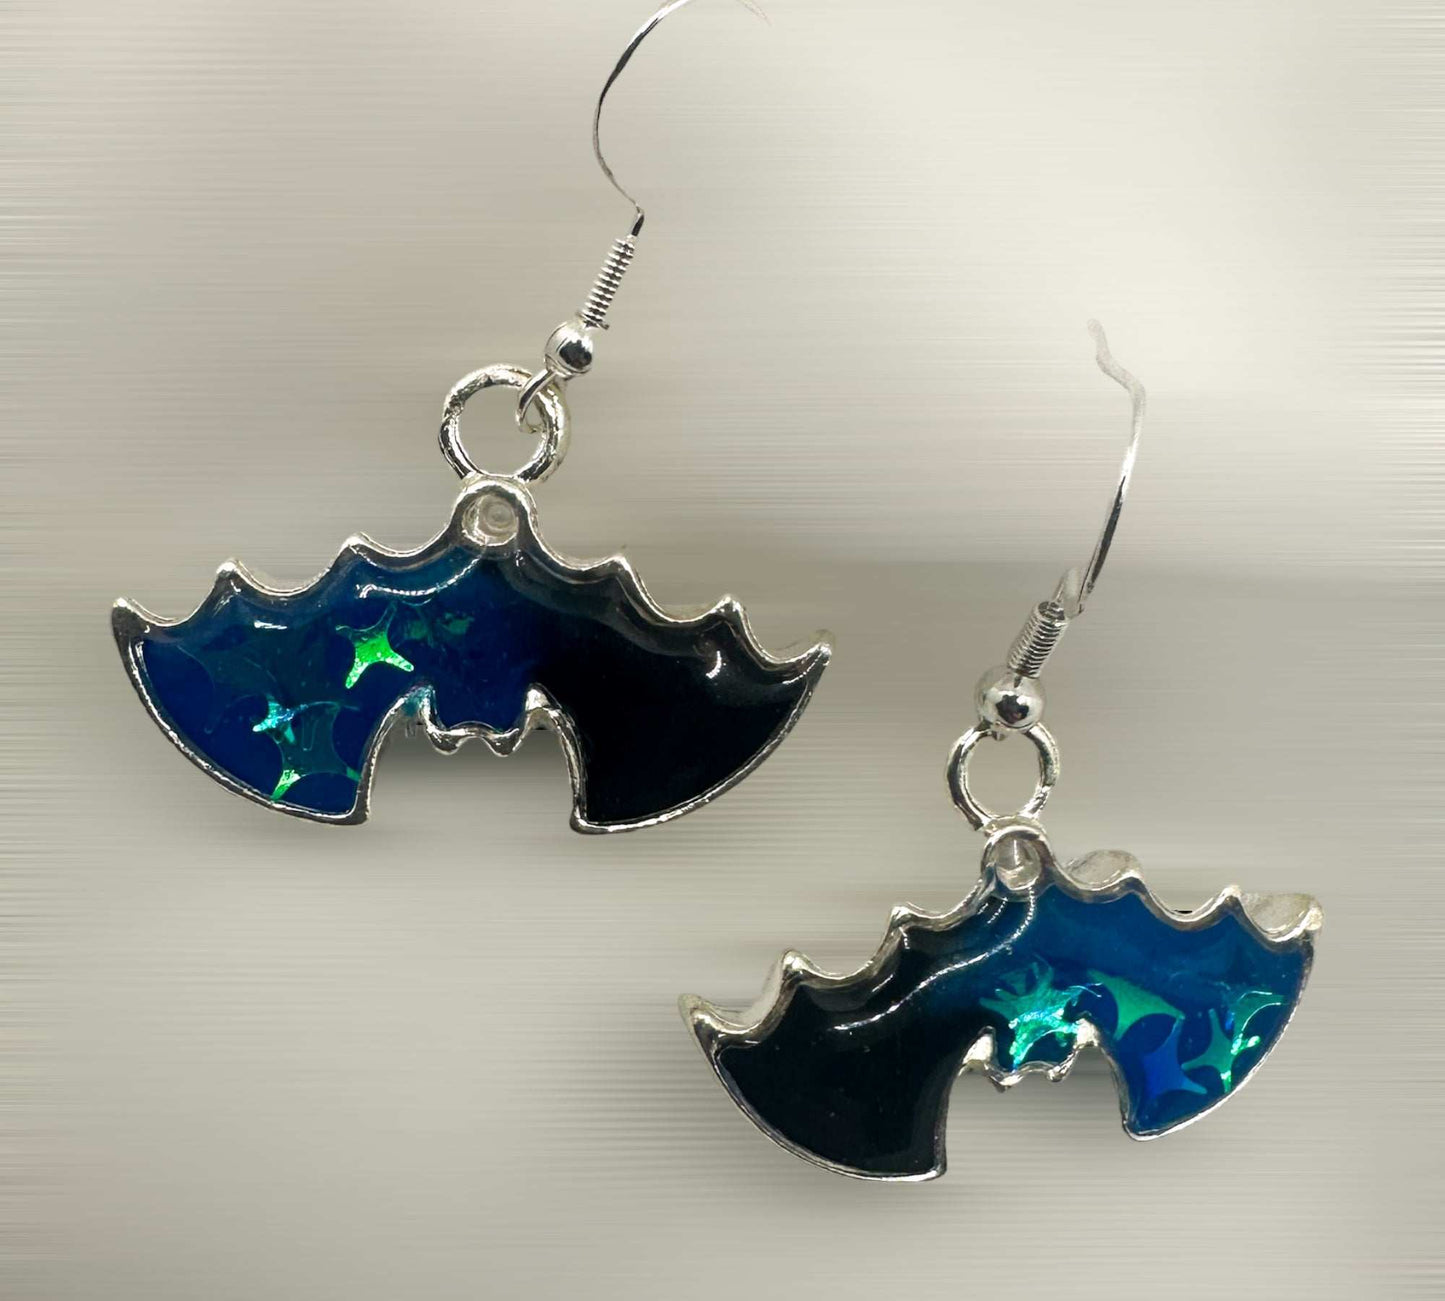 Handmade Resin Starry Night Hanging Bat Earrings: Unique and Stylish Accessories